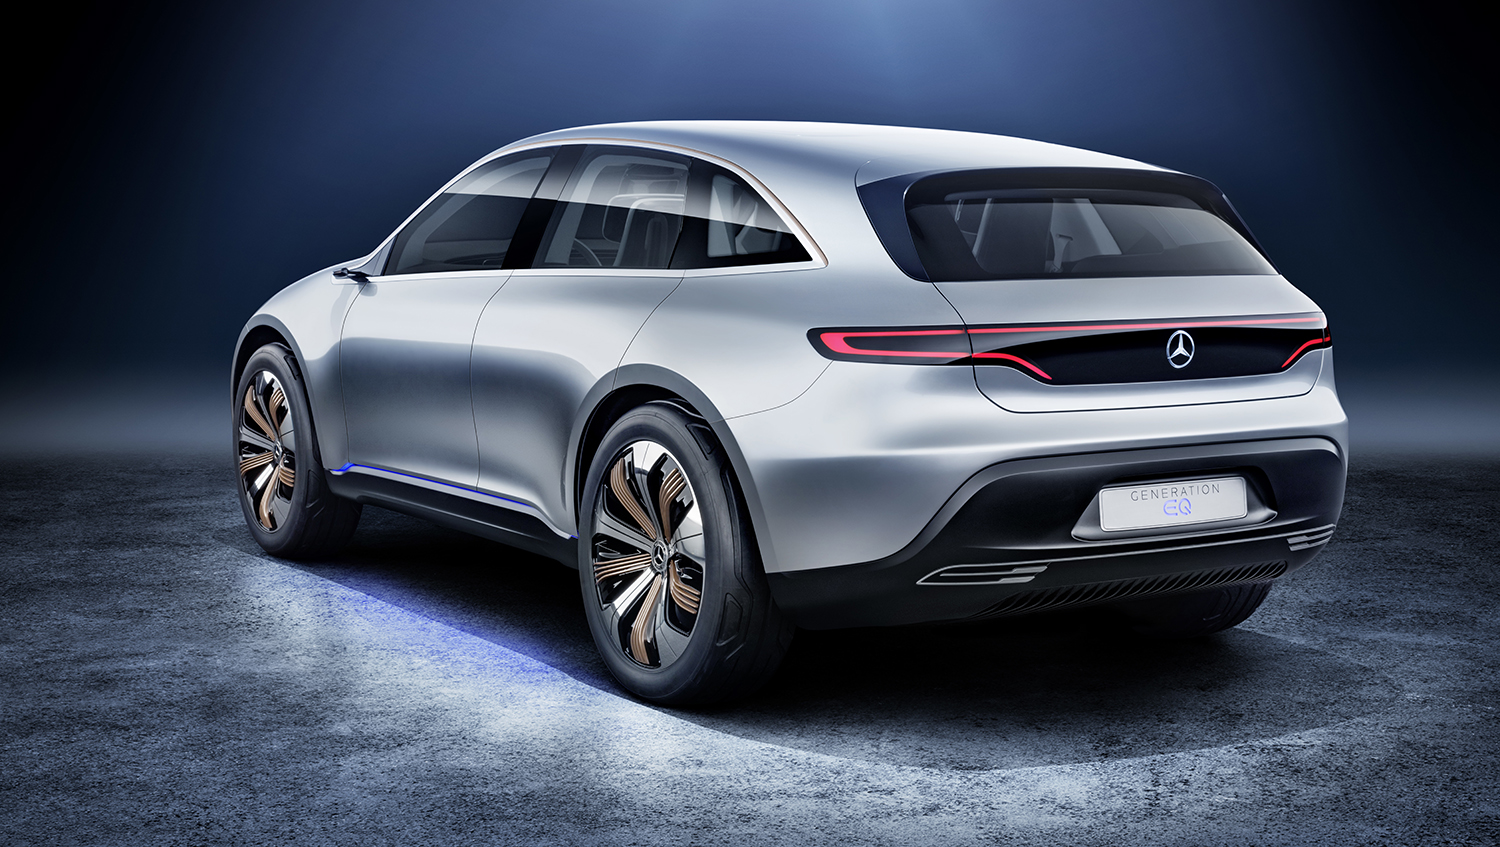 Mercedes Benz Generation EQ Revealed Electric SUV Debuts In Paris